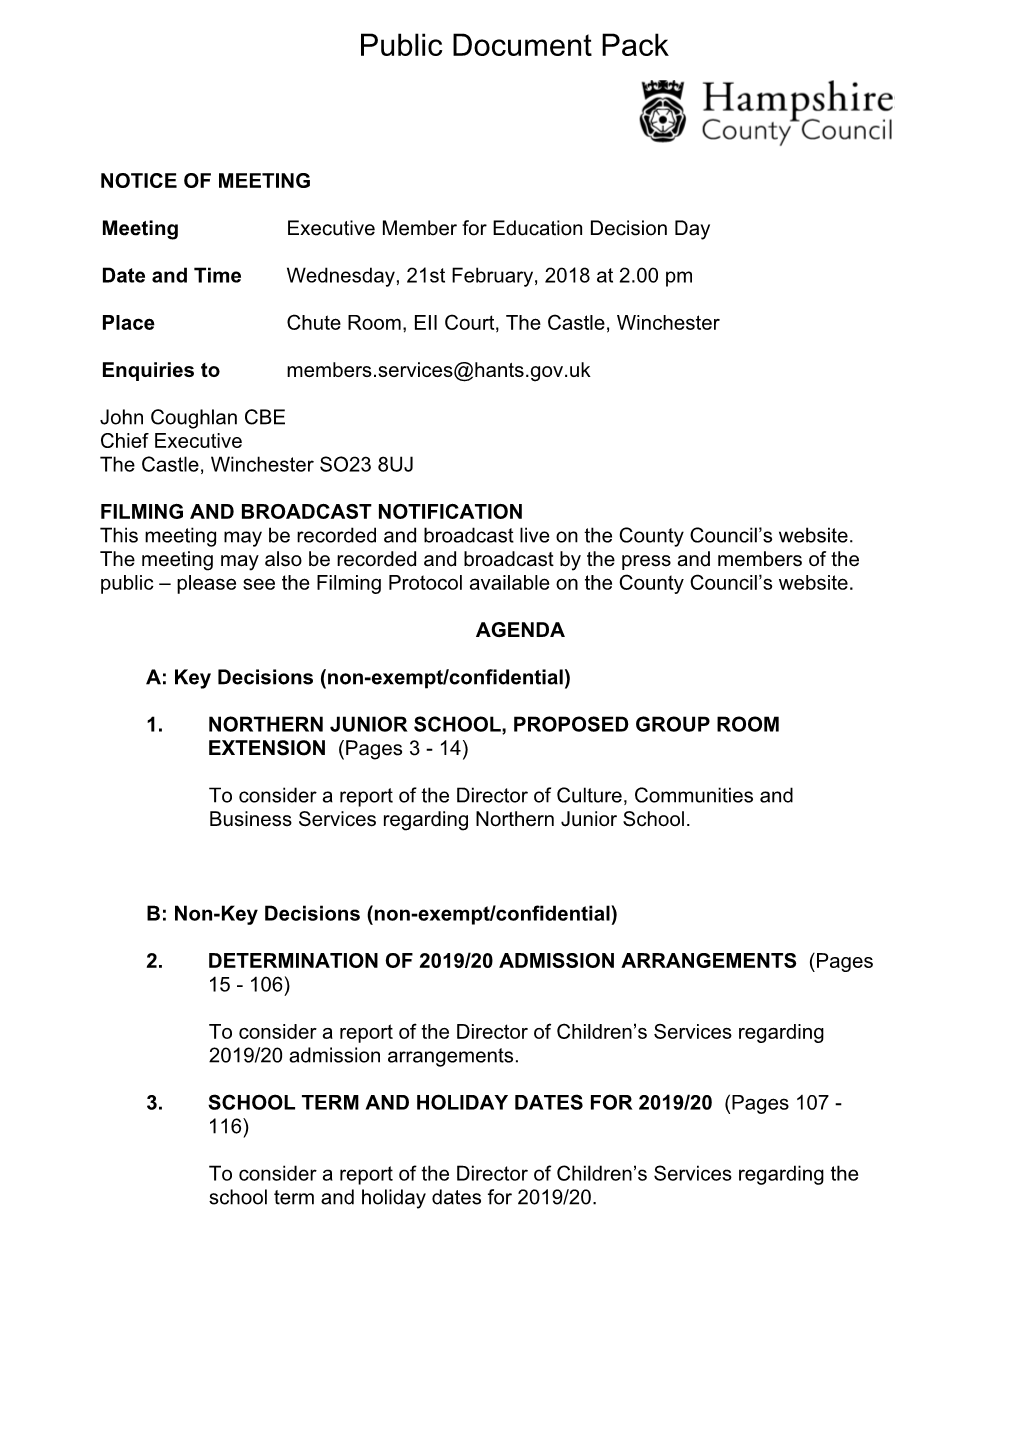 (Public Pack)Agenda Document for Executive Member for Education